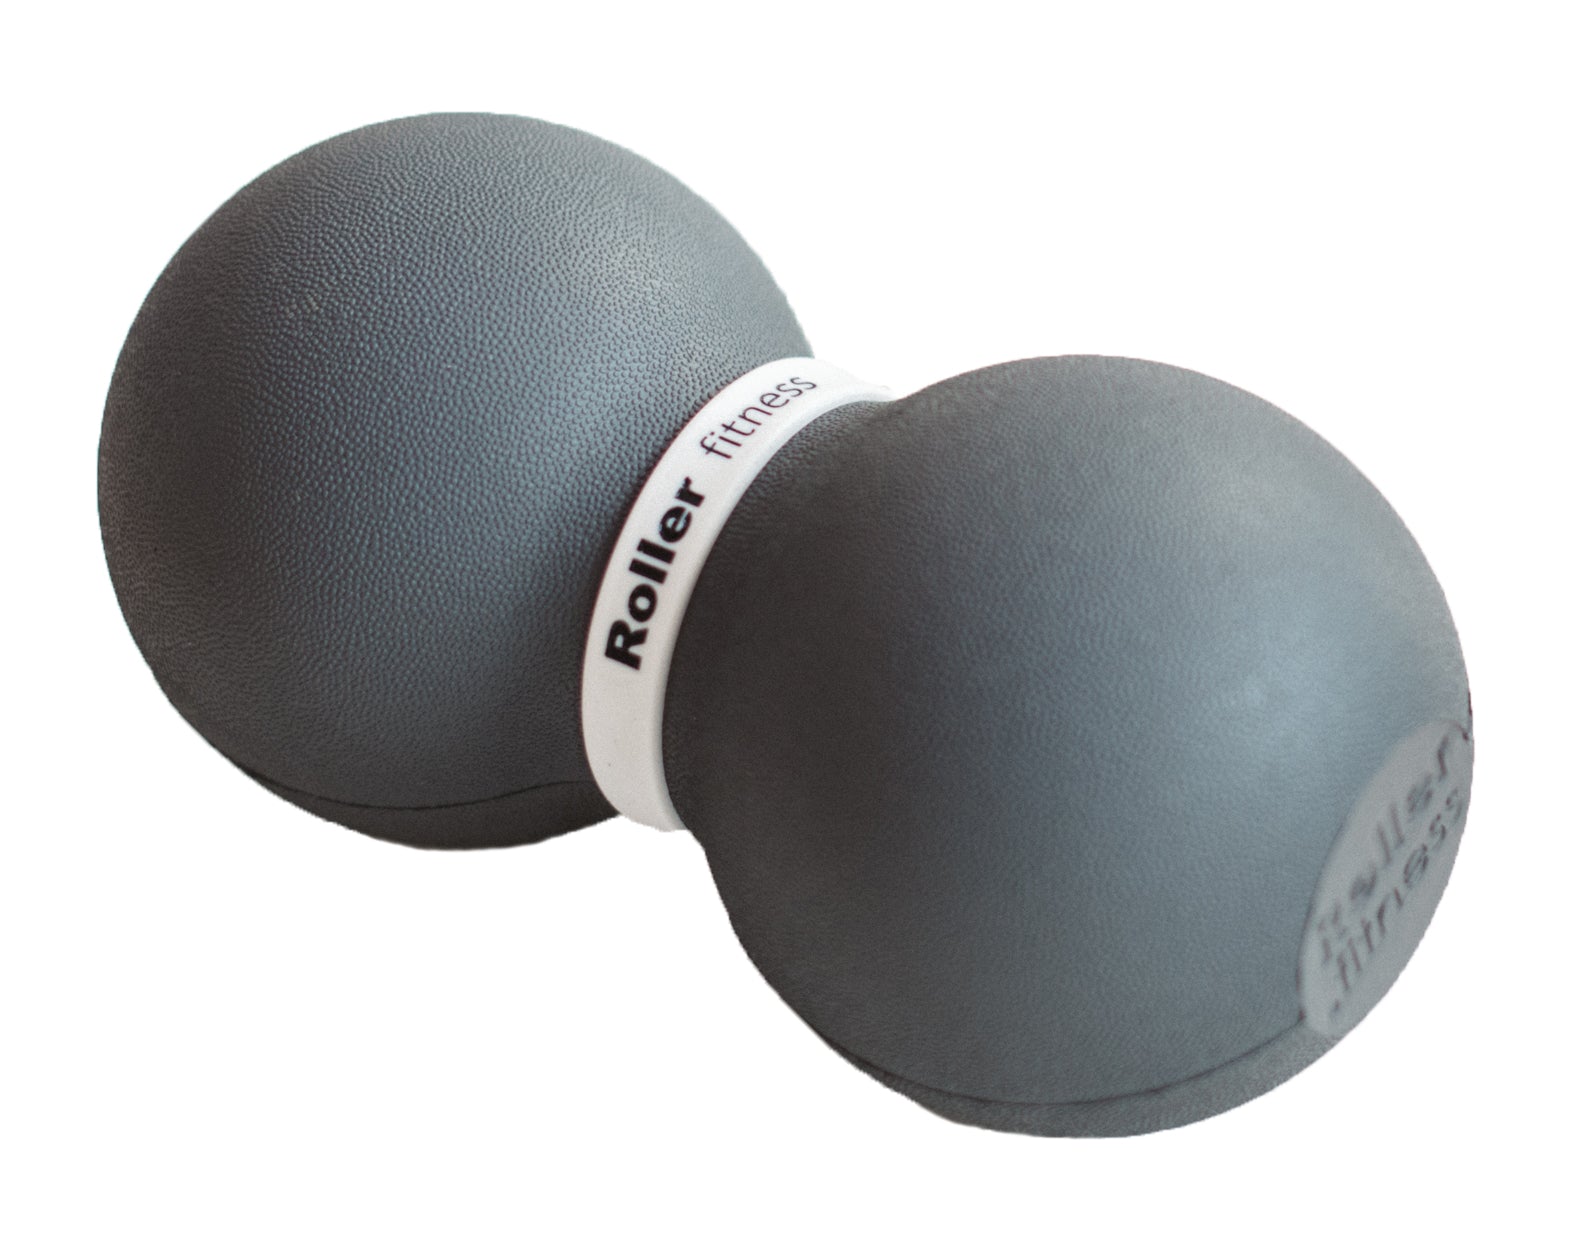 Roller Fitness Compact Foam Rollers and Exercise